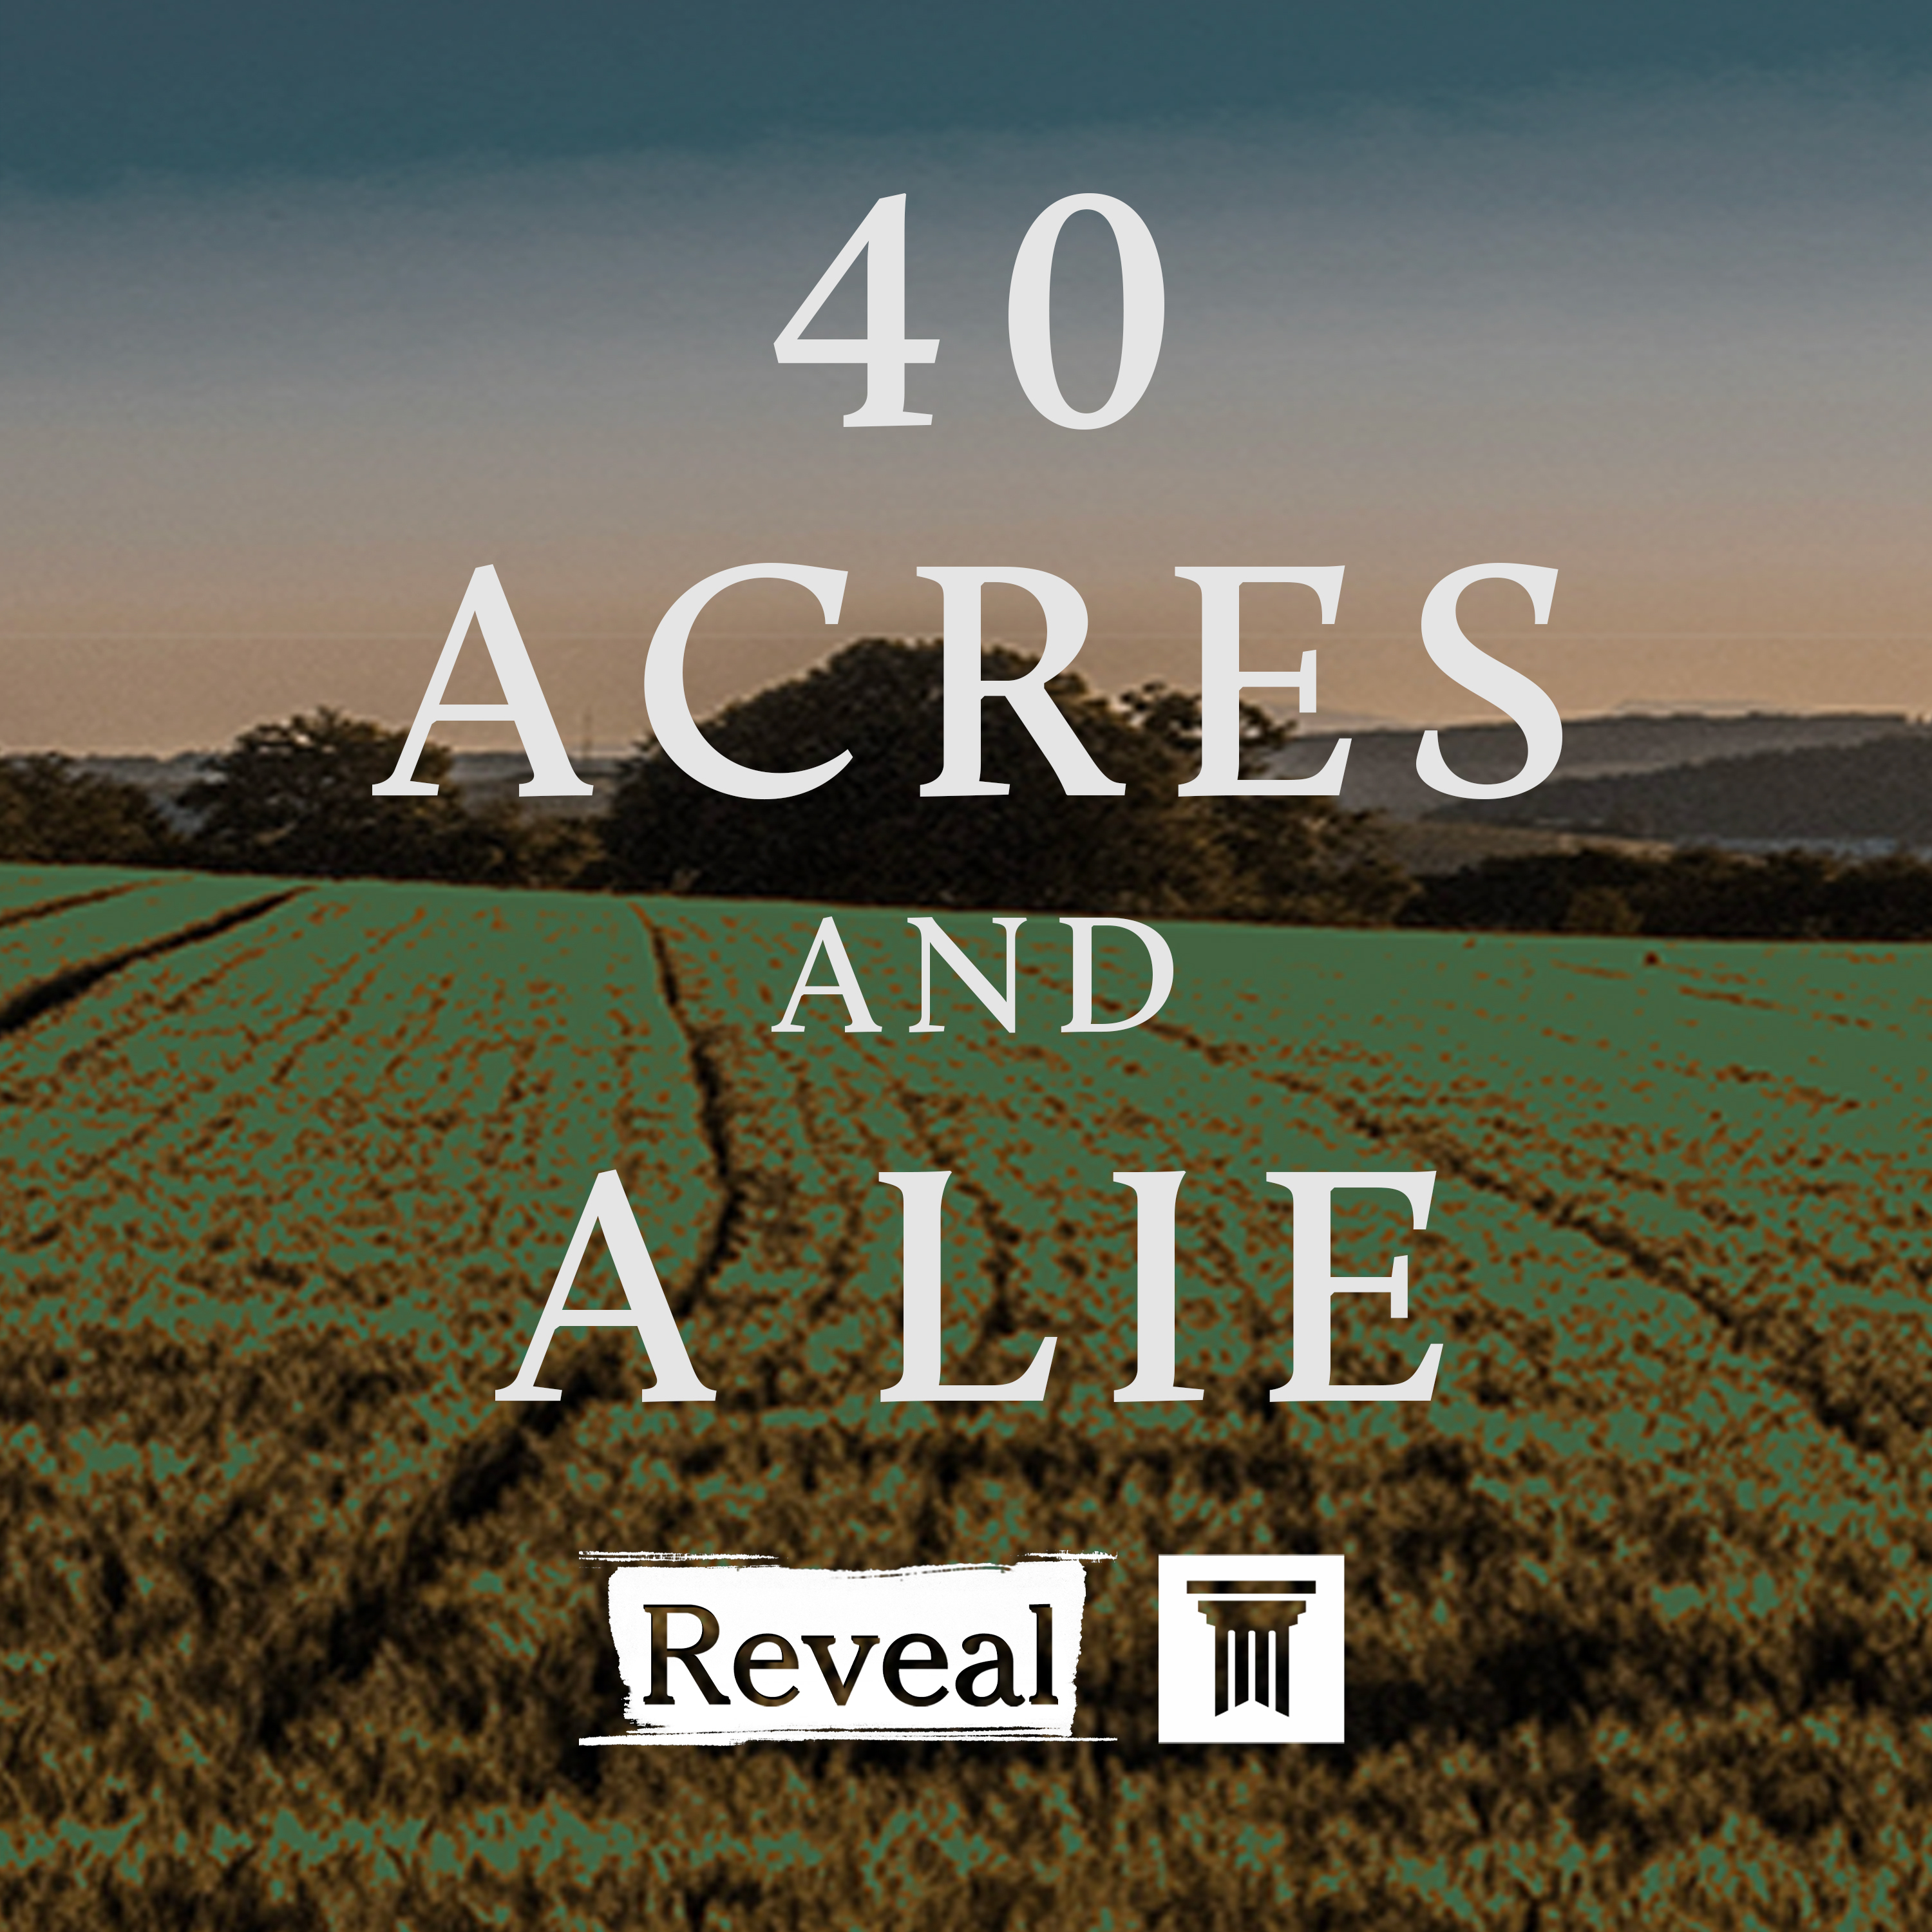 Thumbnail for "40 Acres and a Lie Trailer".